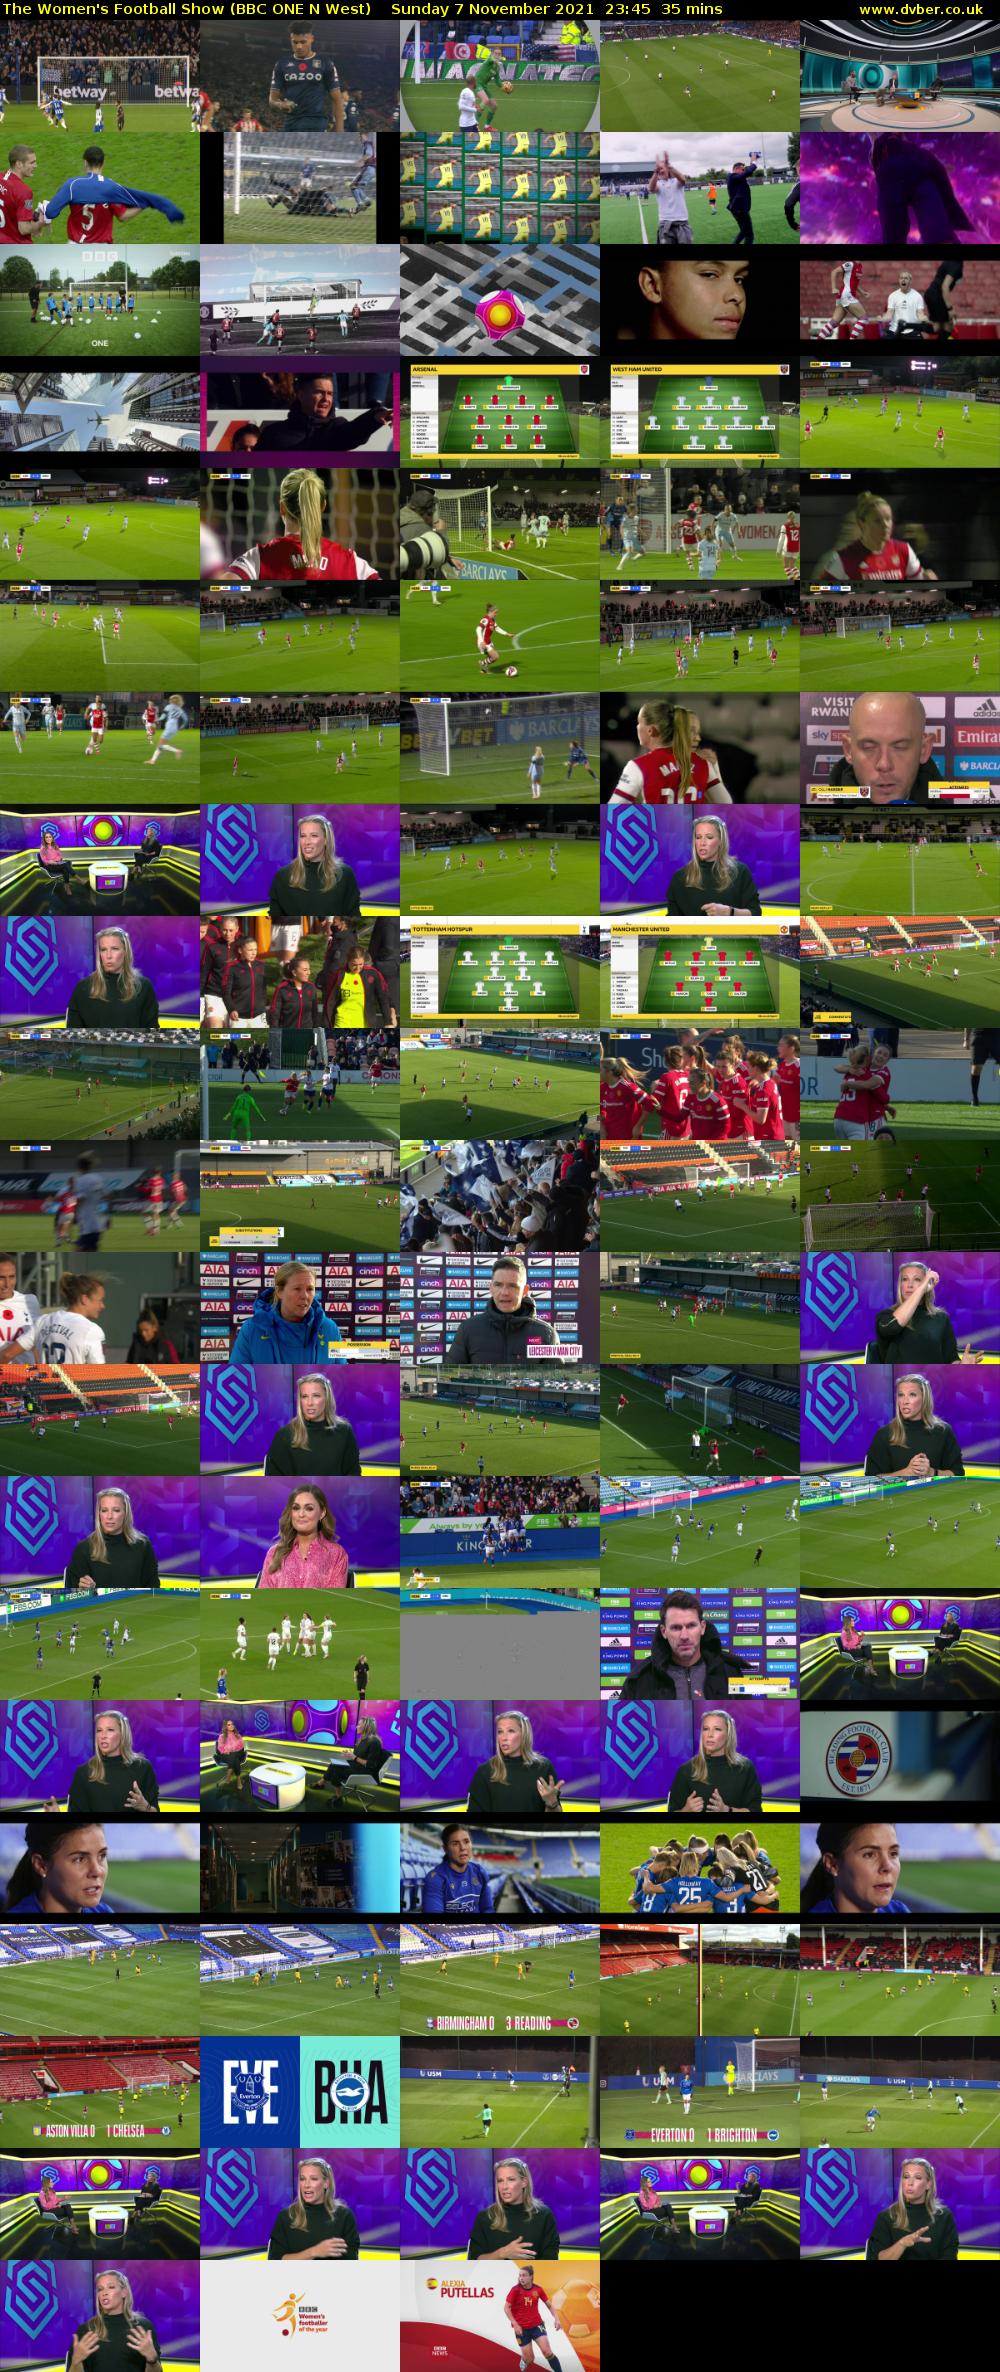 The Women's Football Show (BBC ONE N West) Sunday 7 November 2021 23:45 - 00:20